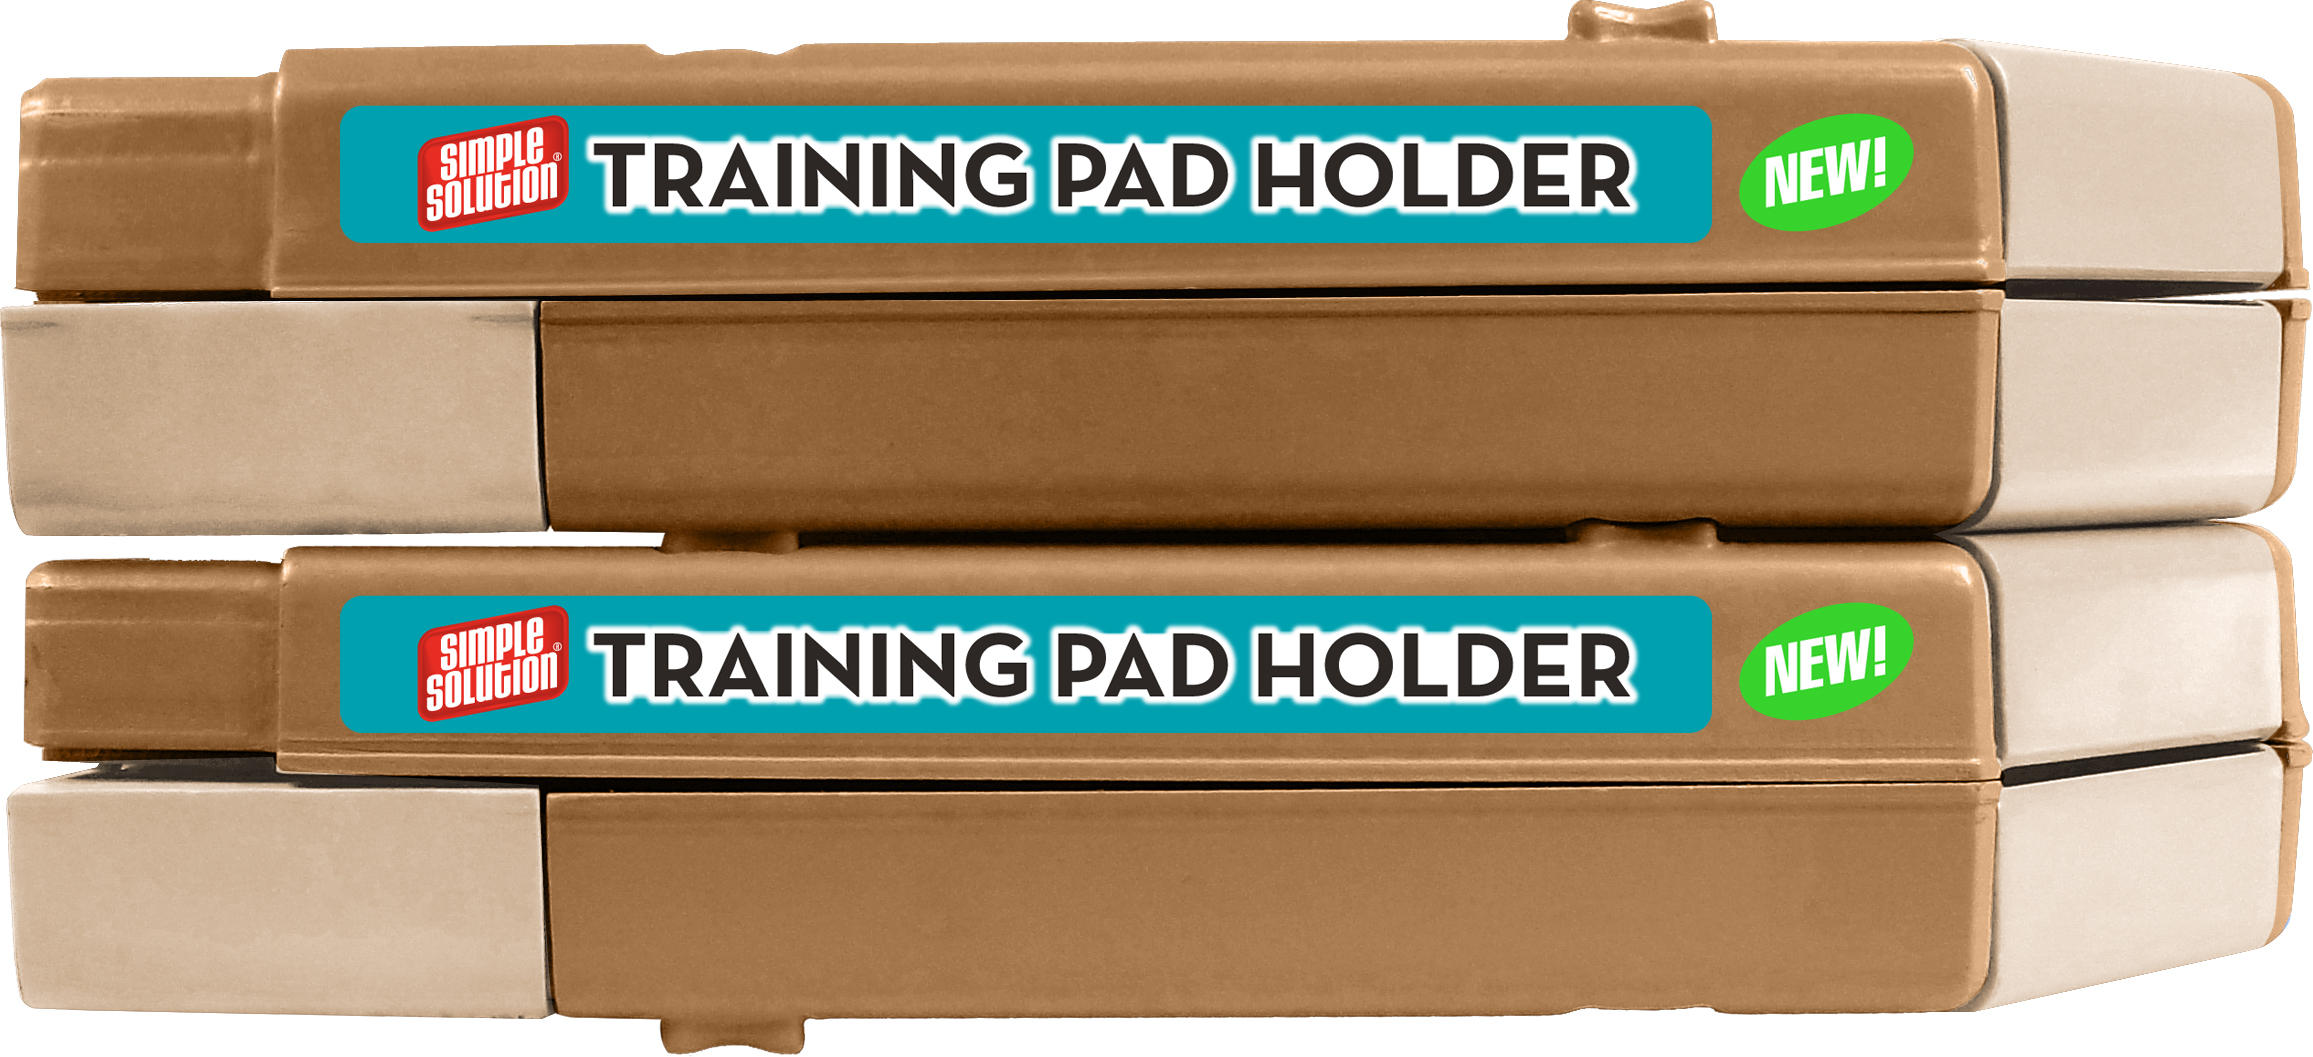 Simple Solution Dog Pad Holder | Portable Tray for Pet Training and Puppy Pads | Protection Against Pad Leakage, Bunching, and Shredding | Fits Pads 21 x 21 Inches or Smaller - image 2 of 2